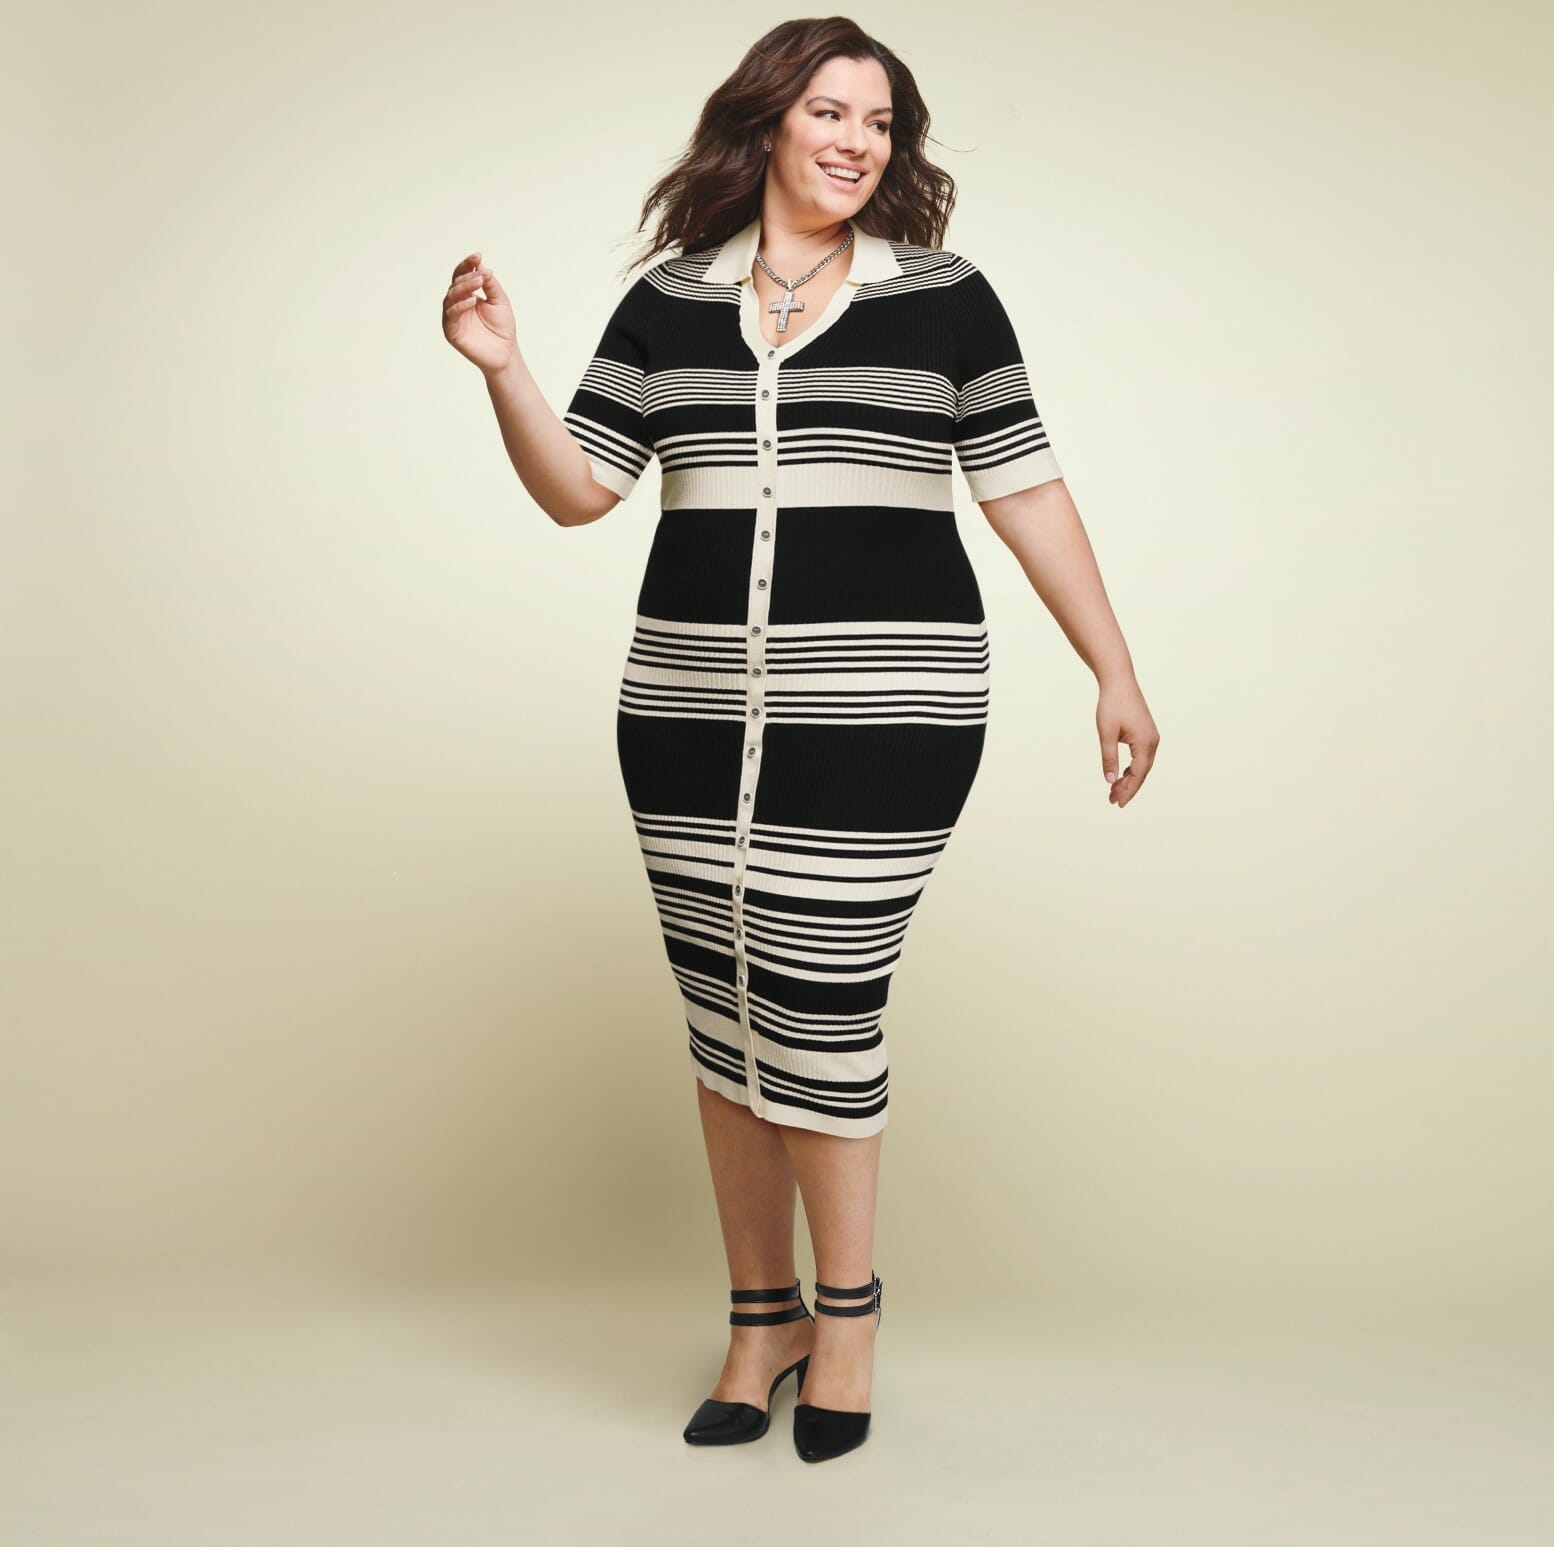 plus size model wearing a stripped white and black knit dress